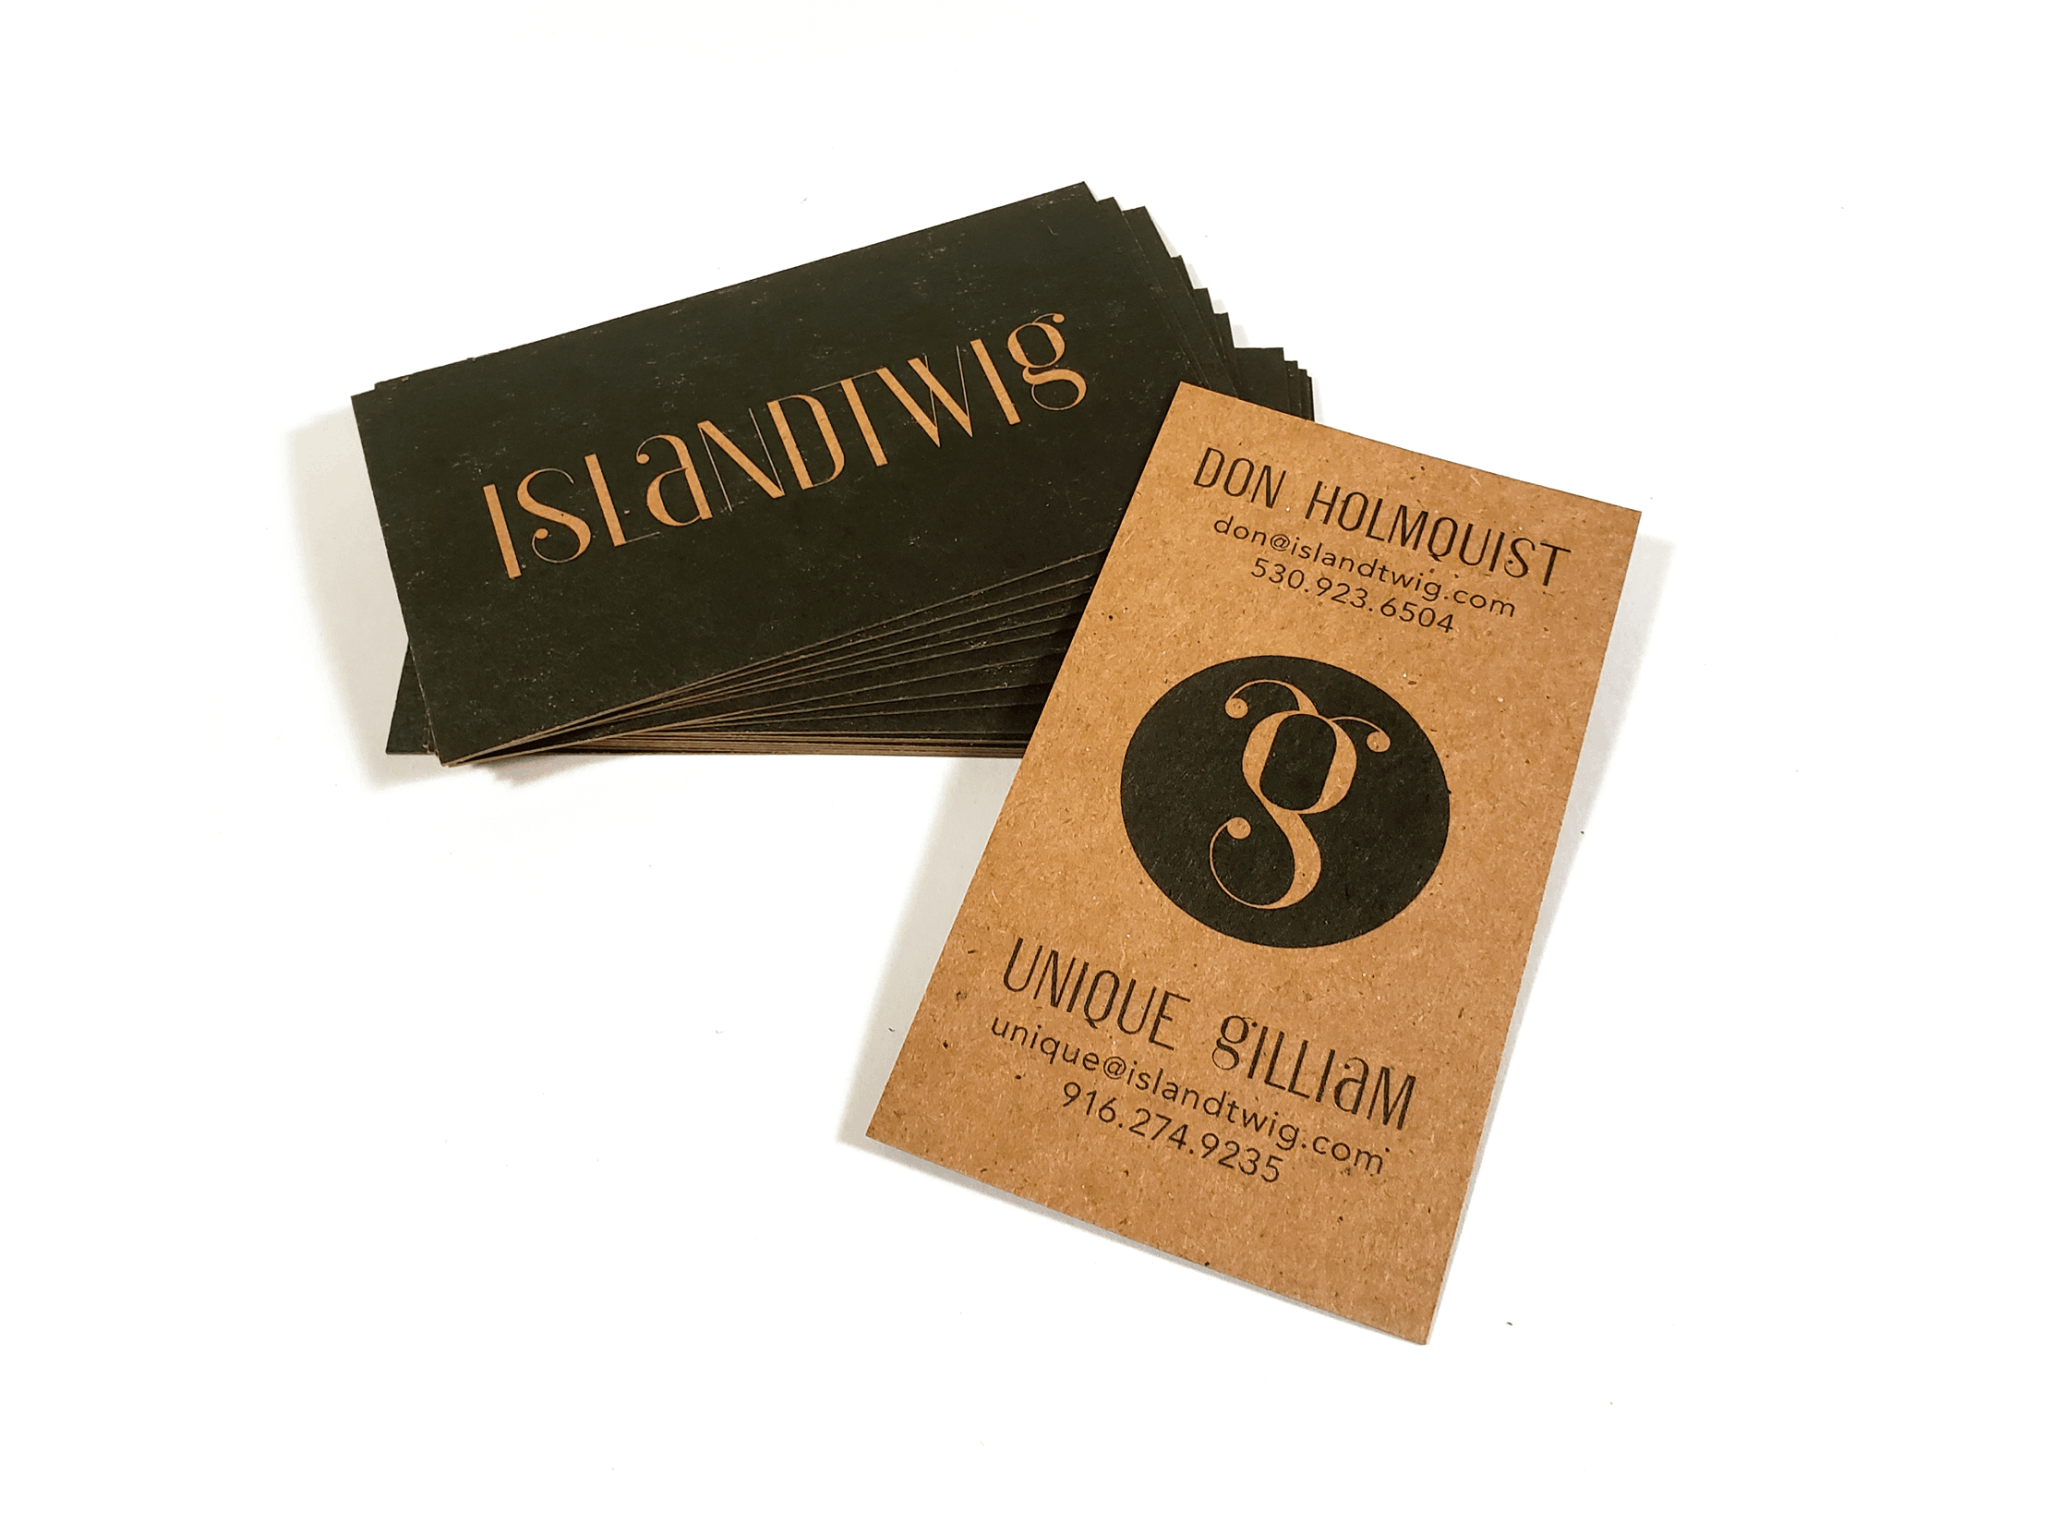 Dual-Business-Card-islandtwig-don-and-unique